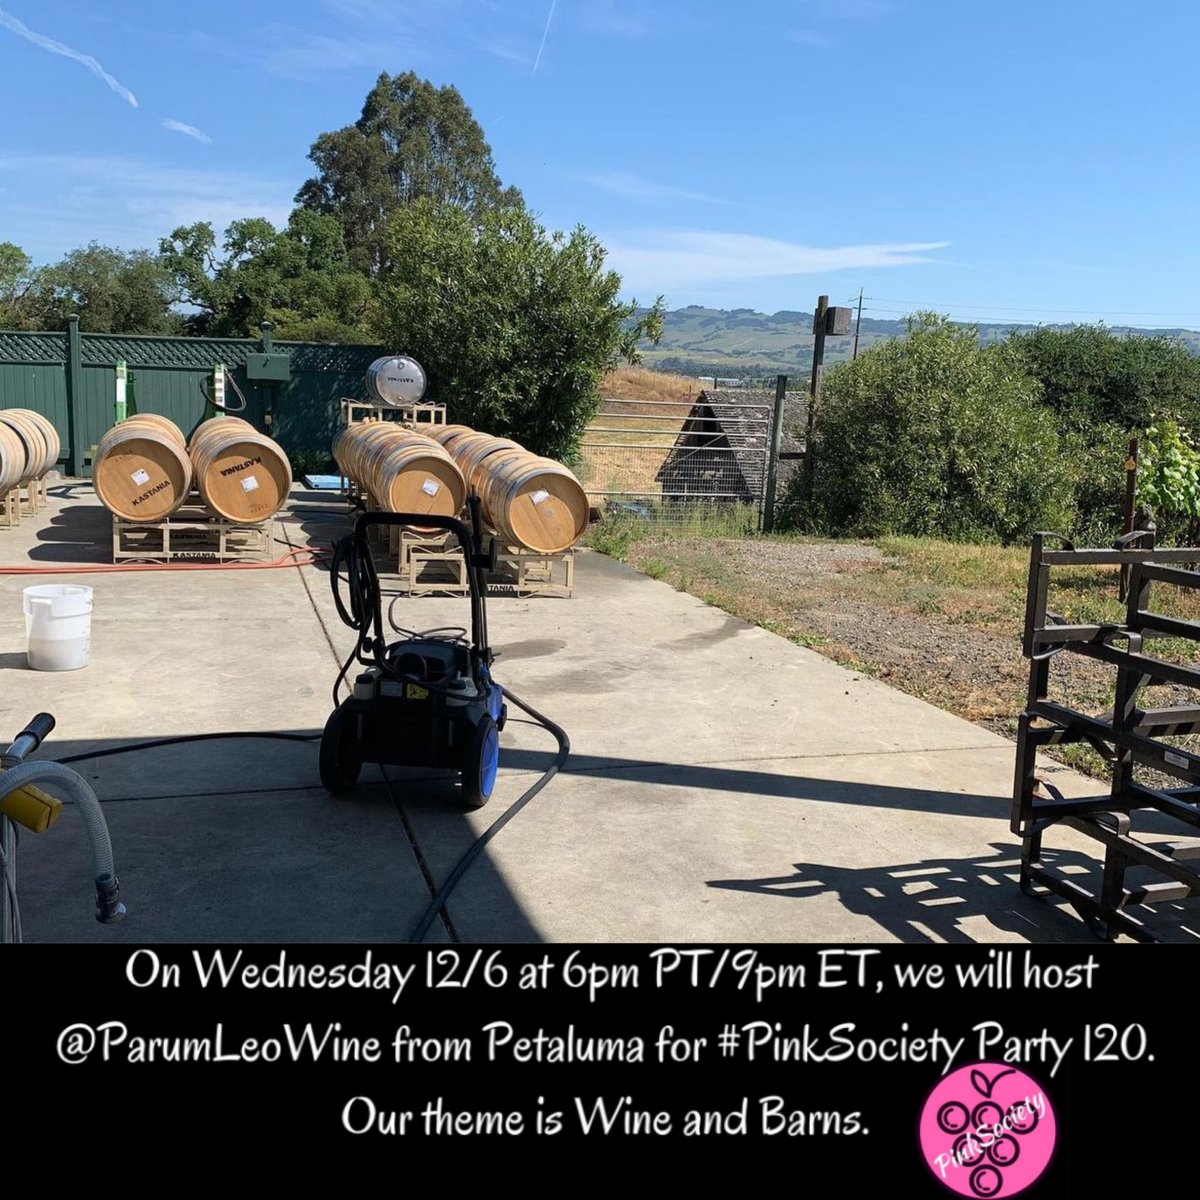 Room for ONE barn pic. DM yours today. On Wednesday 12/6 at 6pm PT/9pm ET, we will host @ParumLeoWine from Petaluma for #PinkSociety Party 120. Our theme is Wine and Barns. @boozychef @JAndrewFlorezII @DeniseMcKahn @simplysallyh @JRyan832 @hoochhhhh